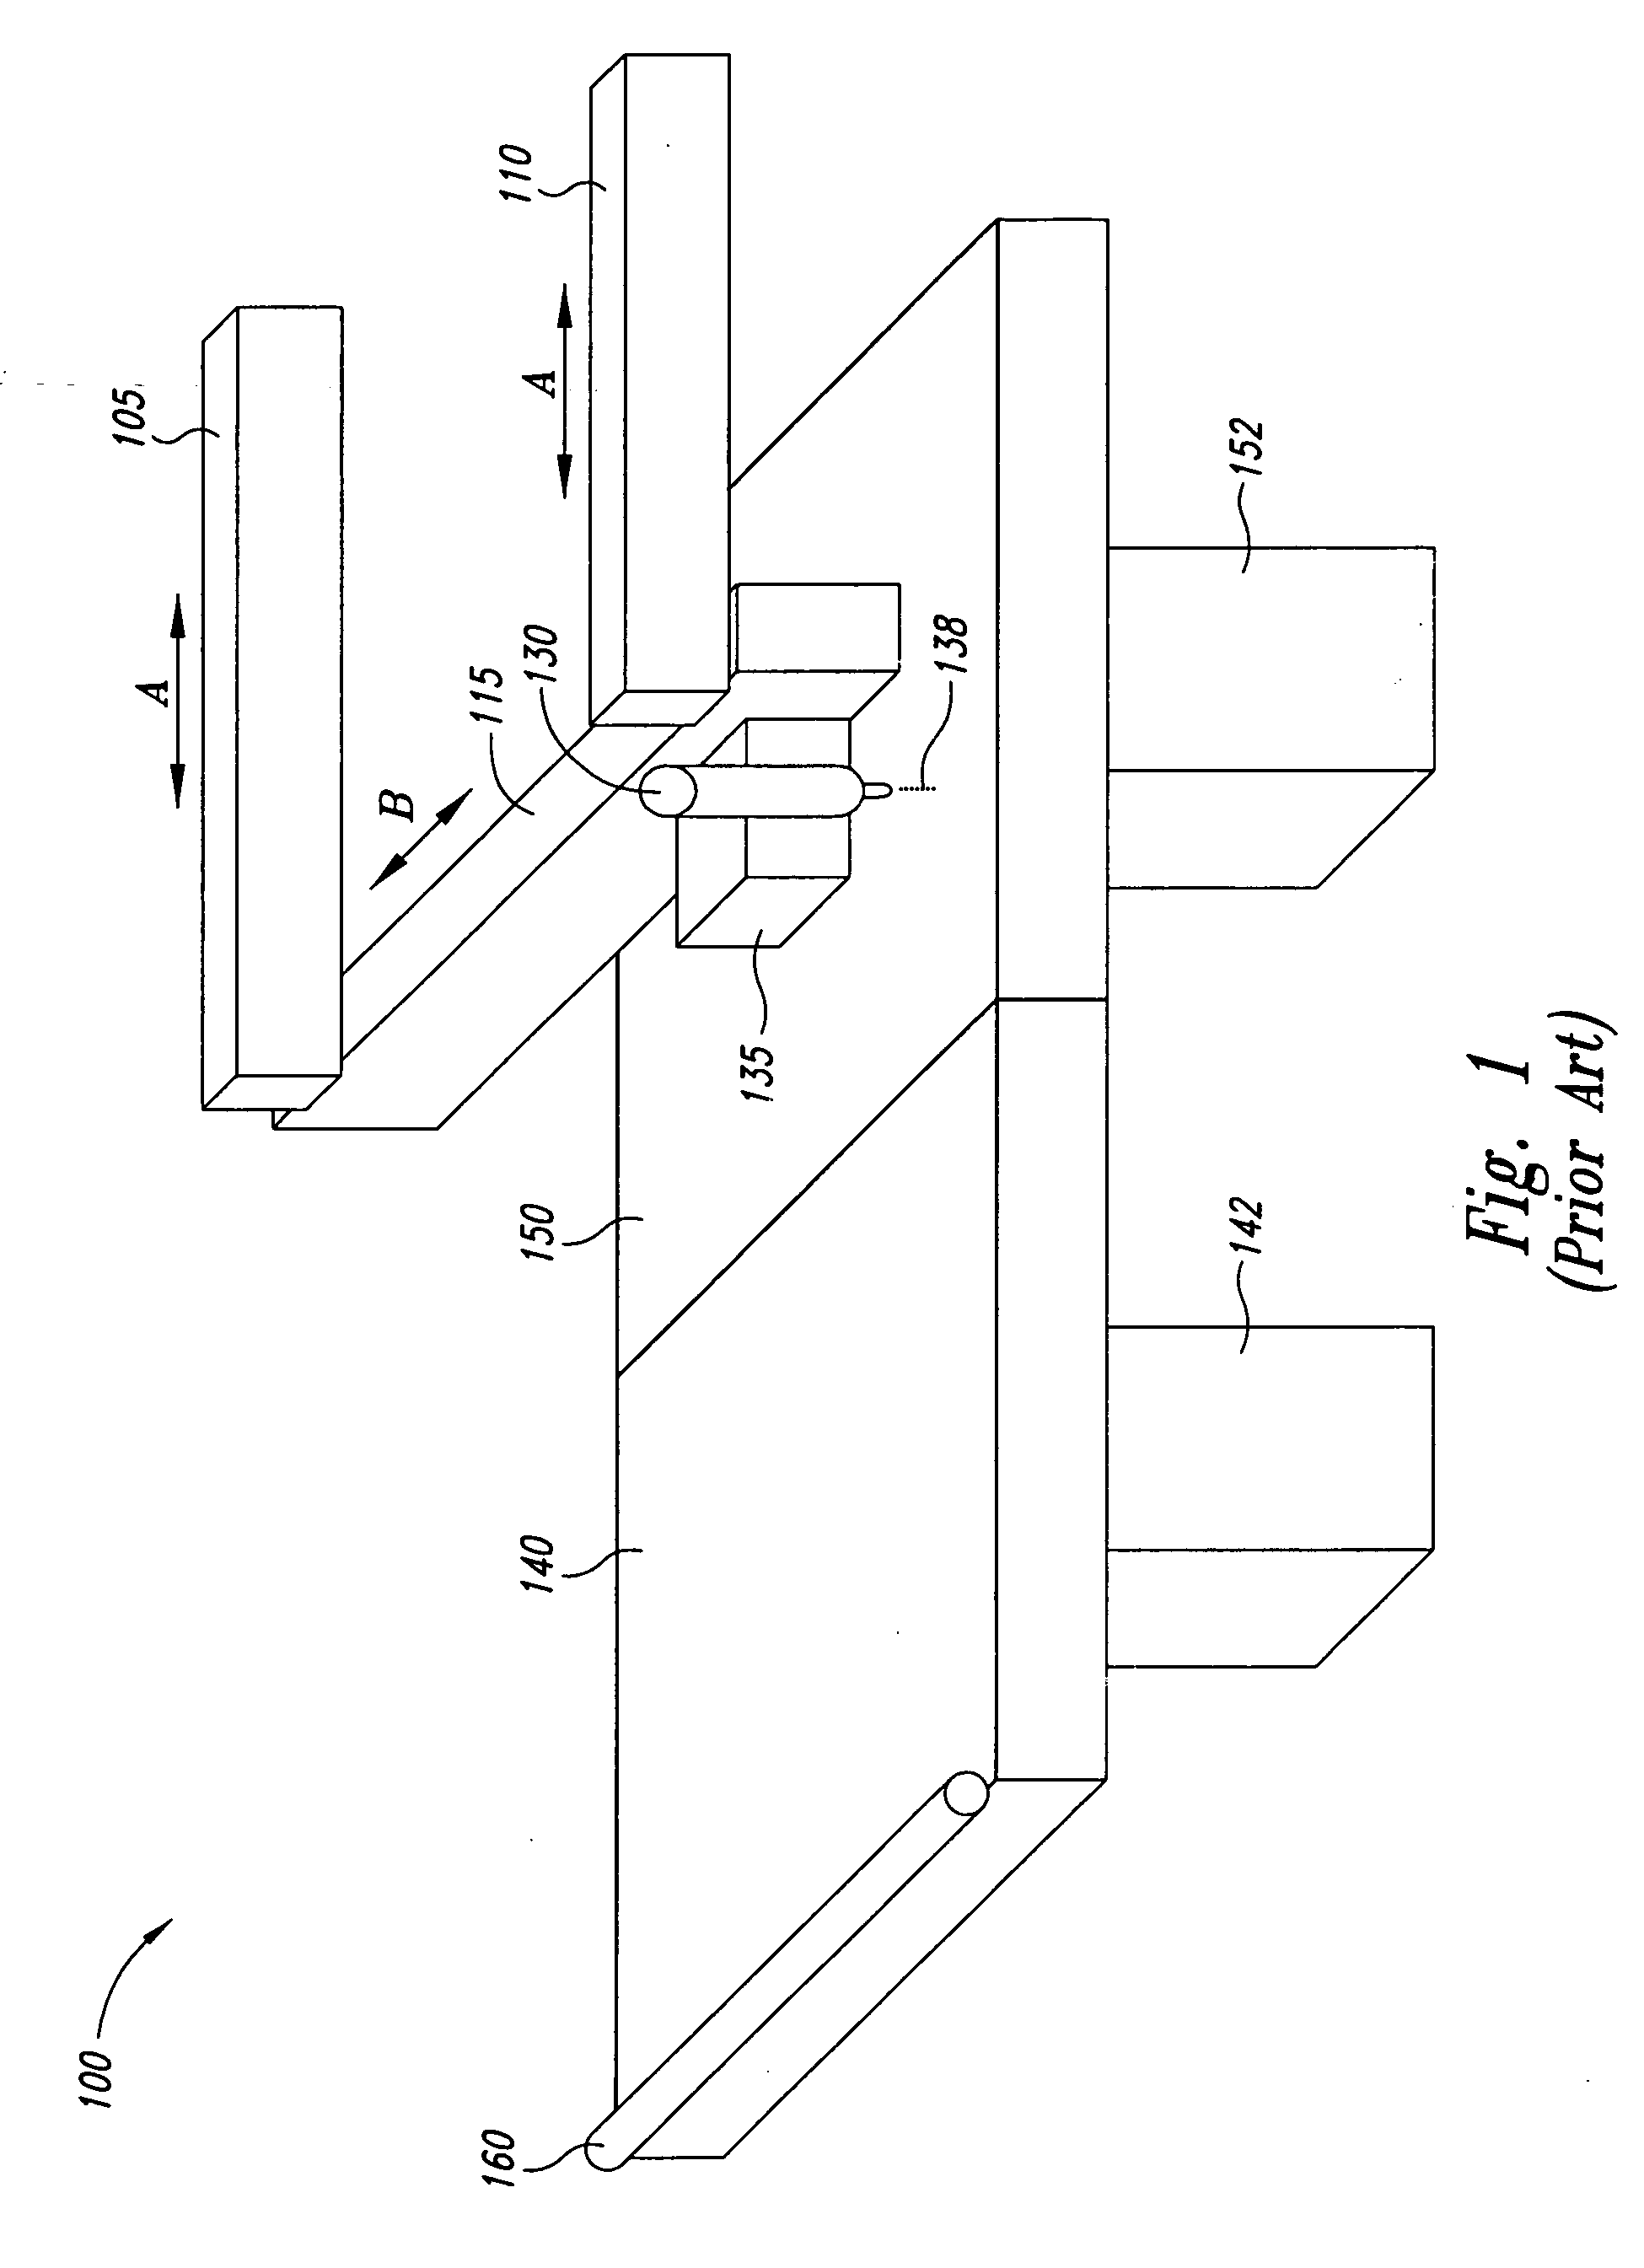 Method of manufacture, installation, and system for an alveolar ridge augmentation graft